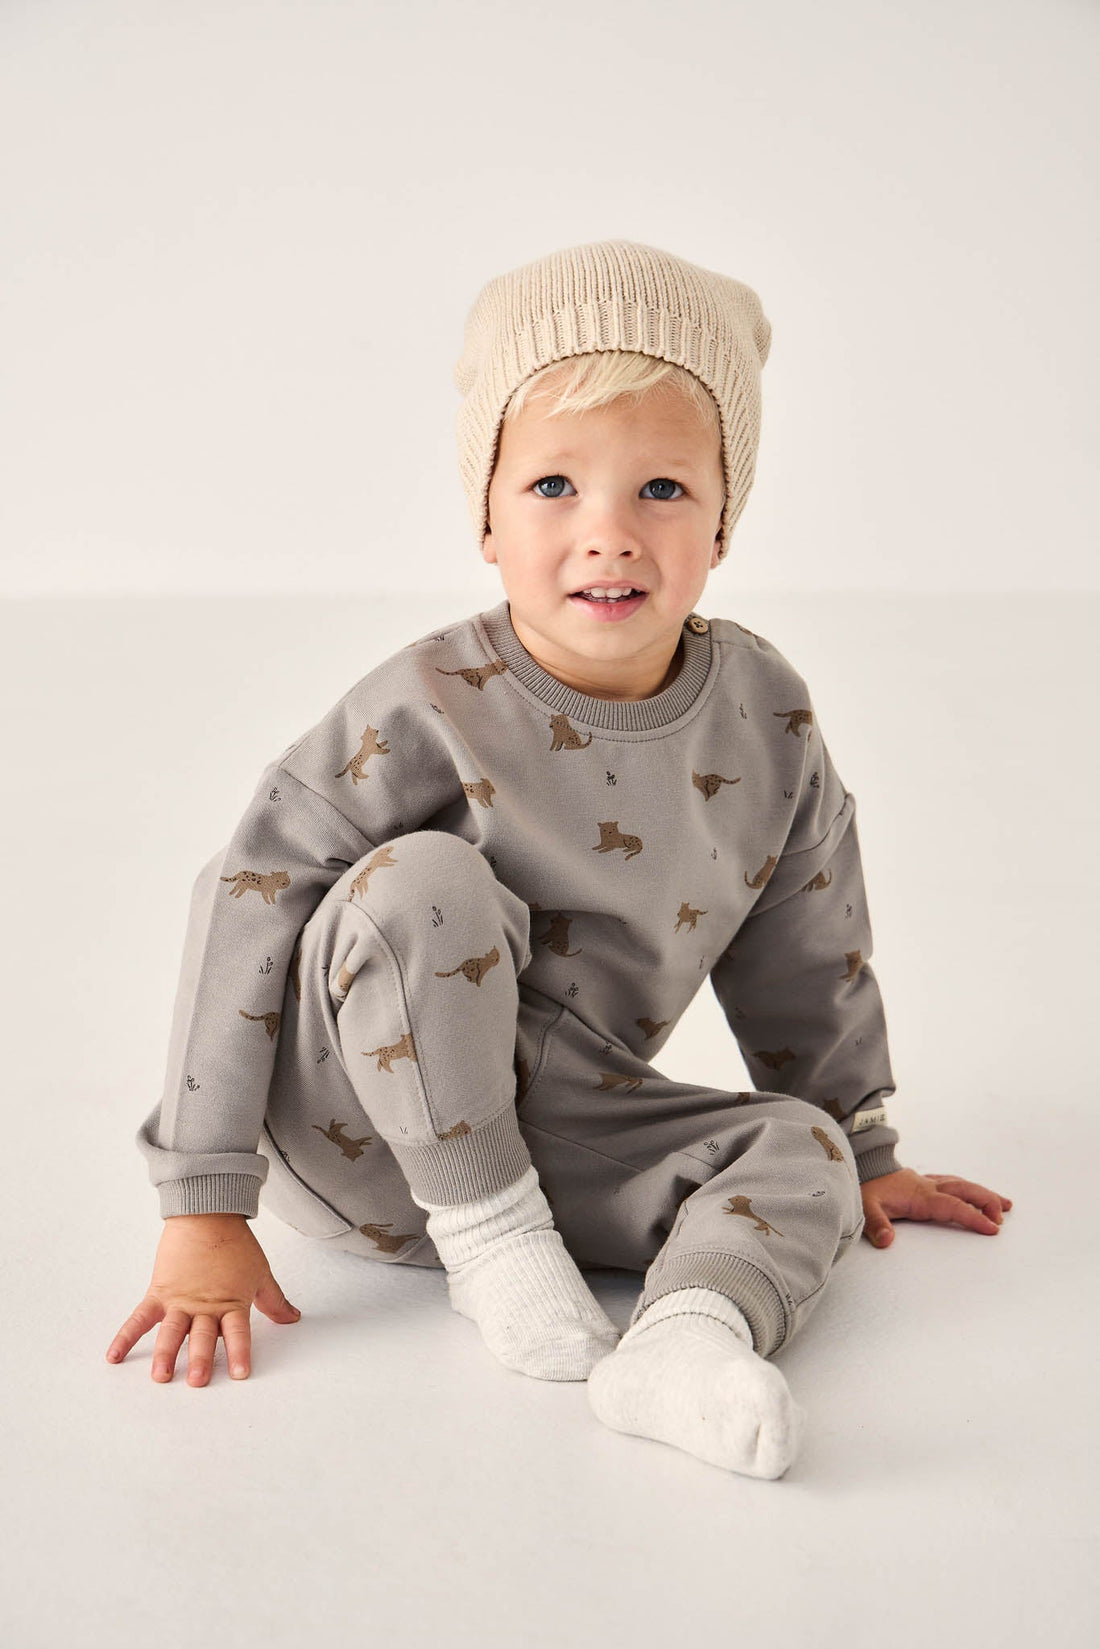 Organic Cotton Jalen Track Pant - Lenny Leopard Sage Childrens Pant from Jamie Kay USA